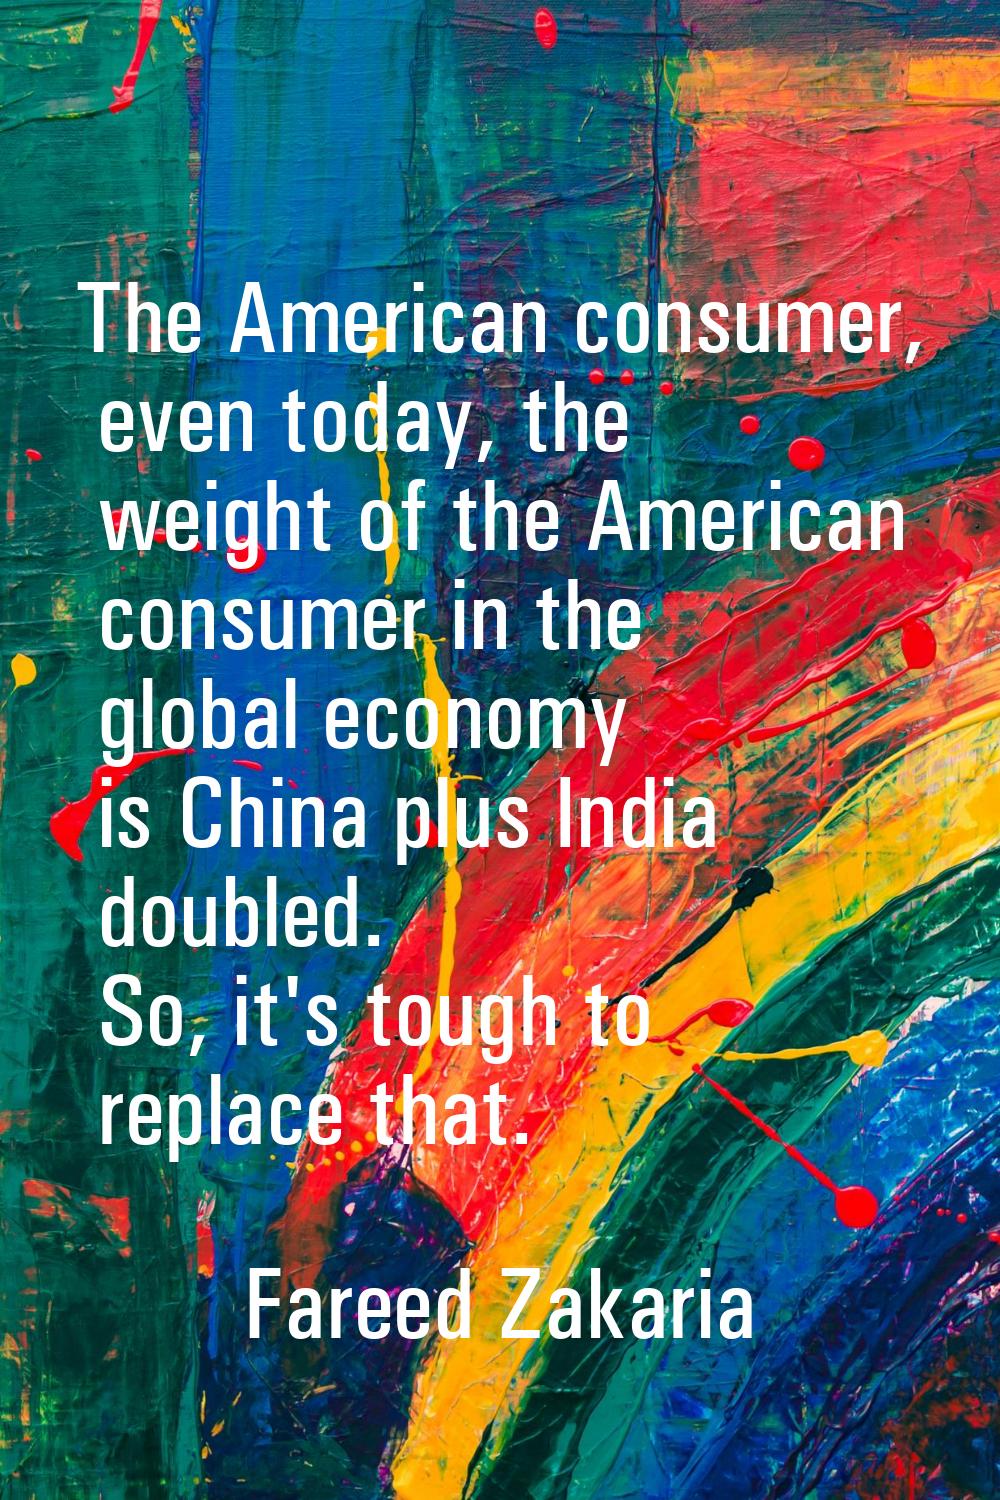 The American consumer, even today, the weight of the American consumer in the global economy is Chi